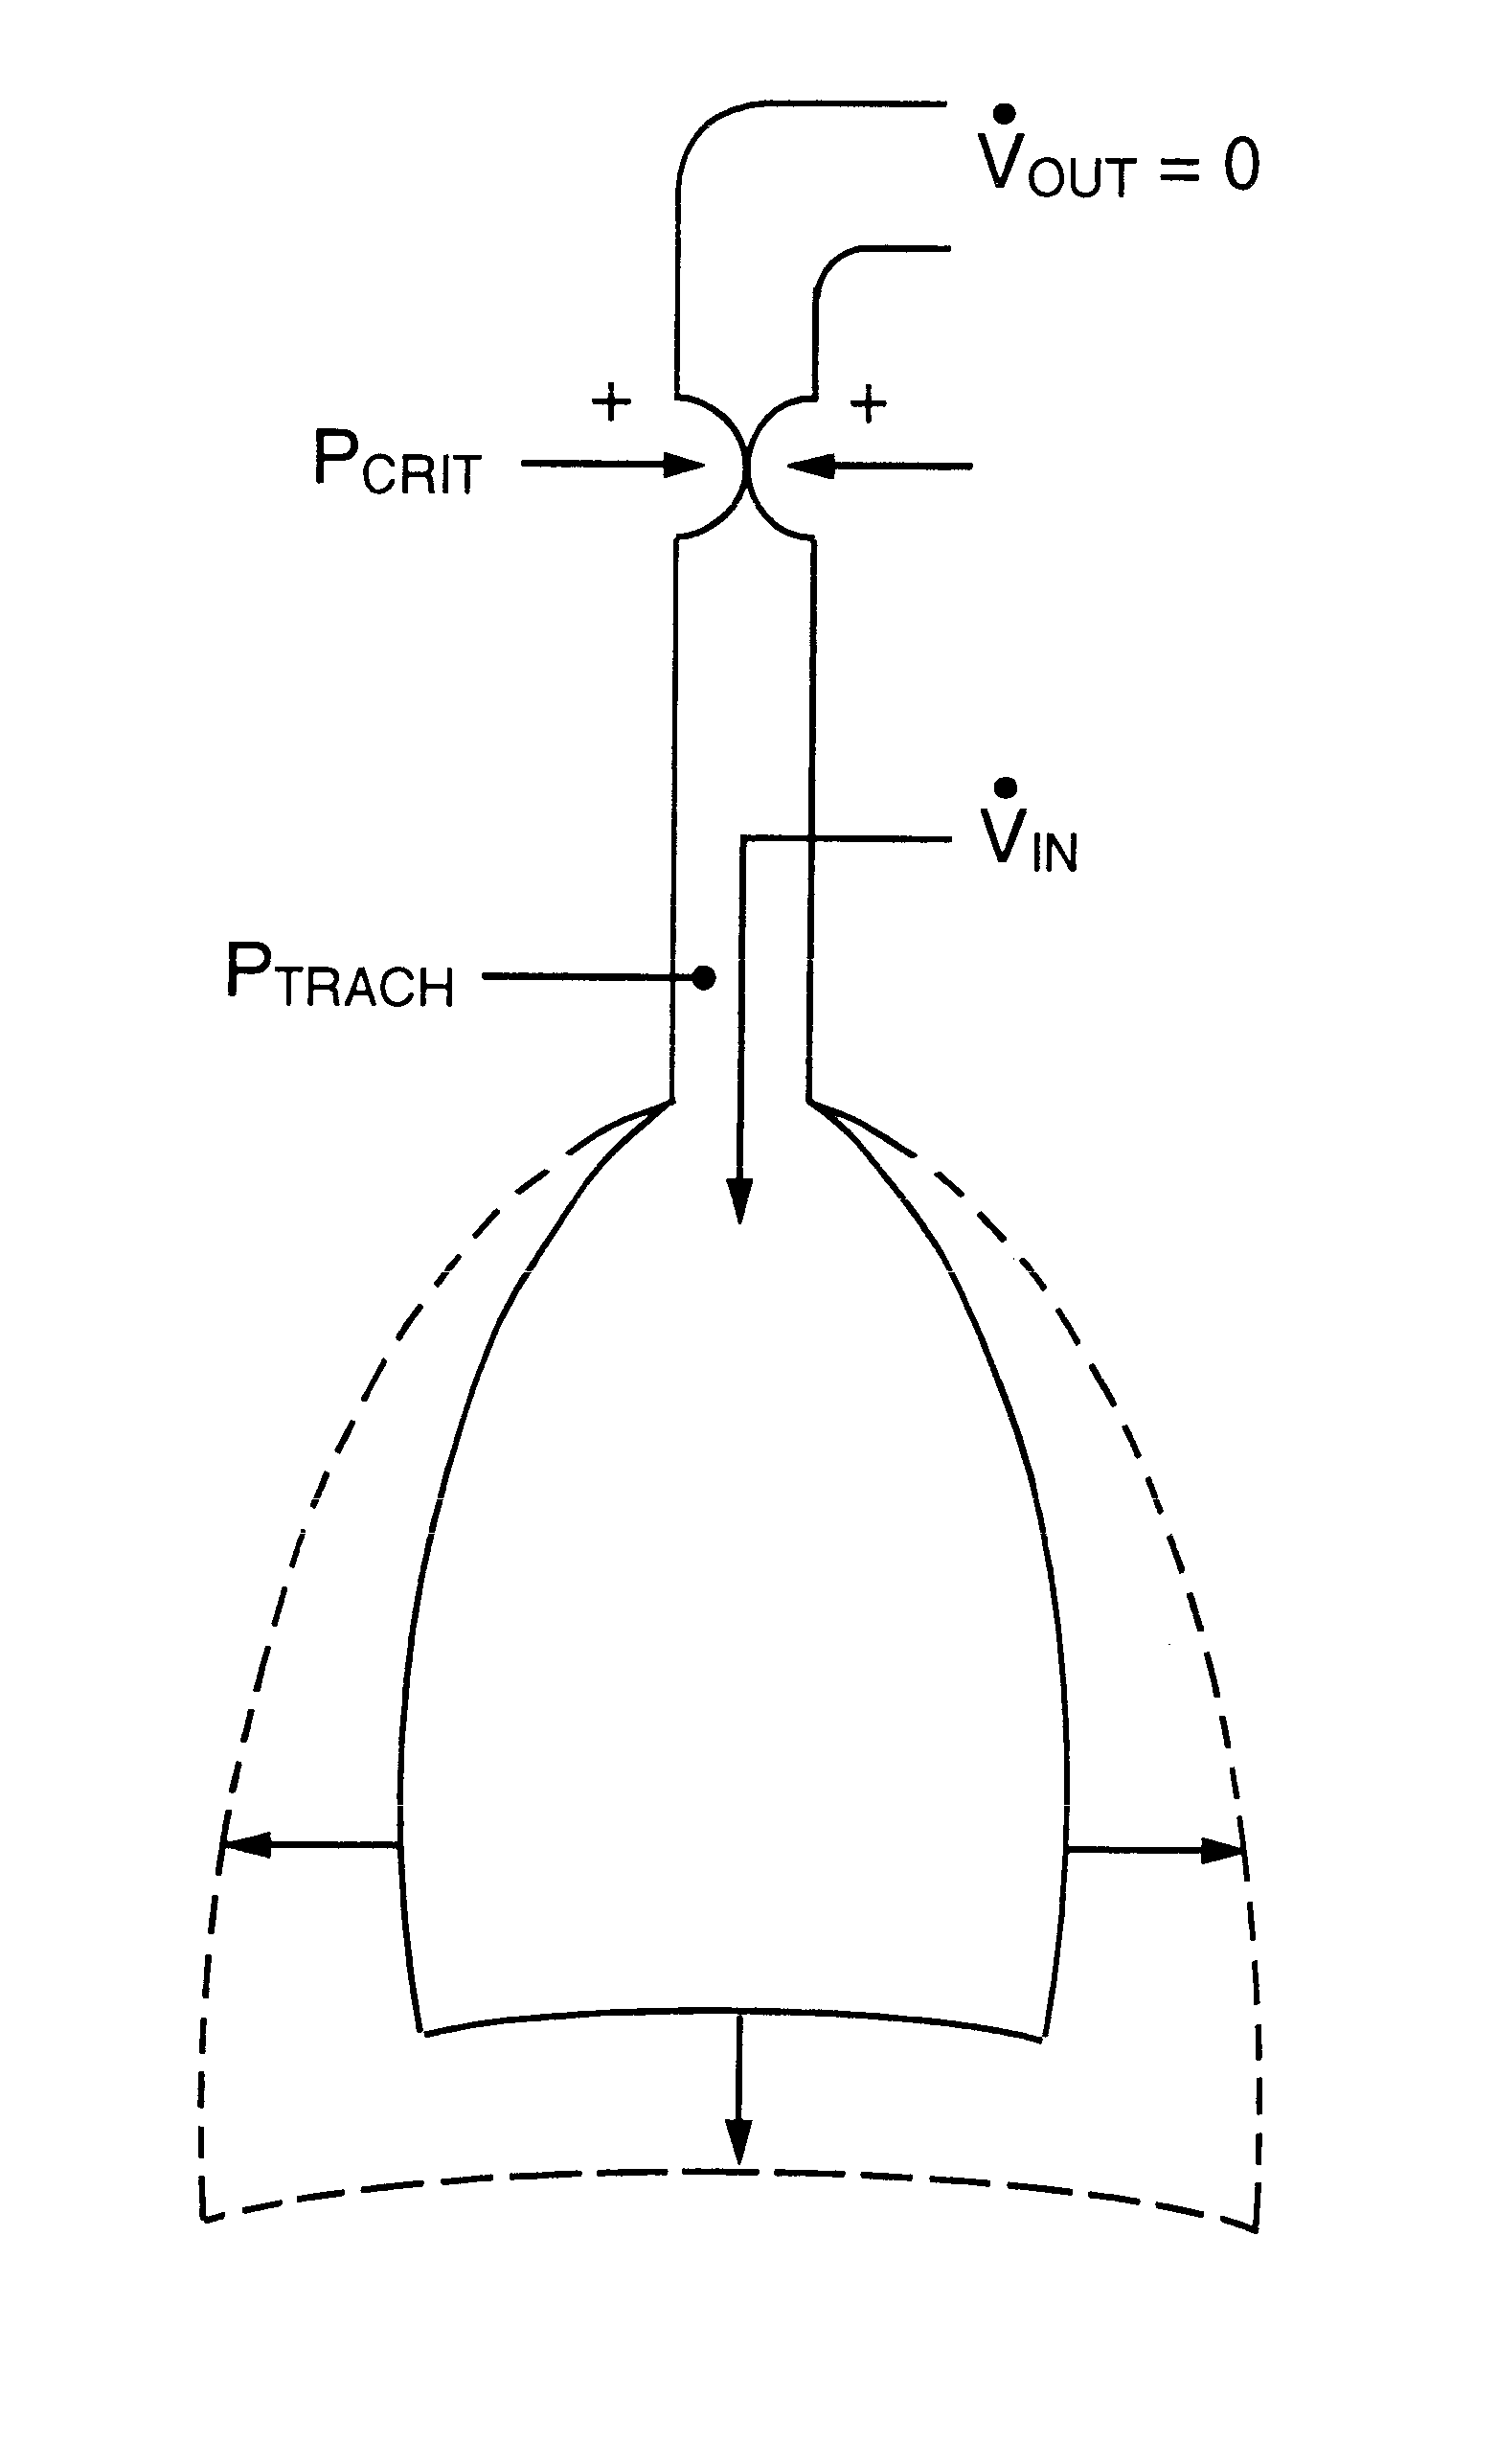 Method and apparatus for providing ventilatory support to a patient